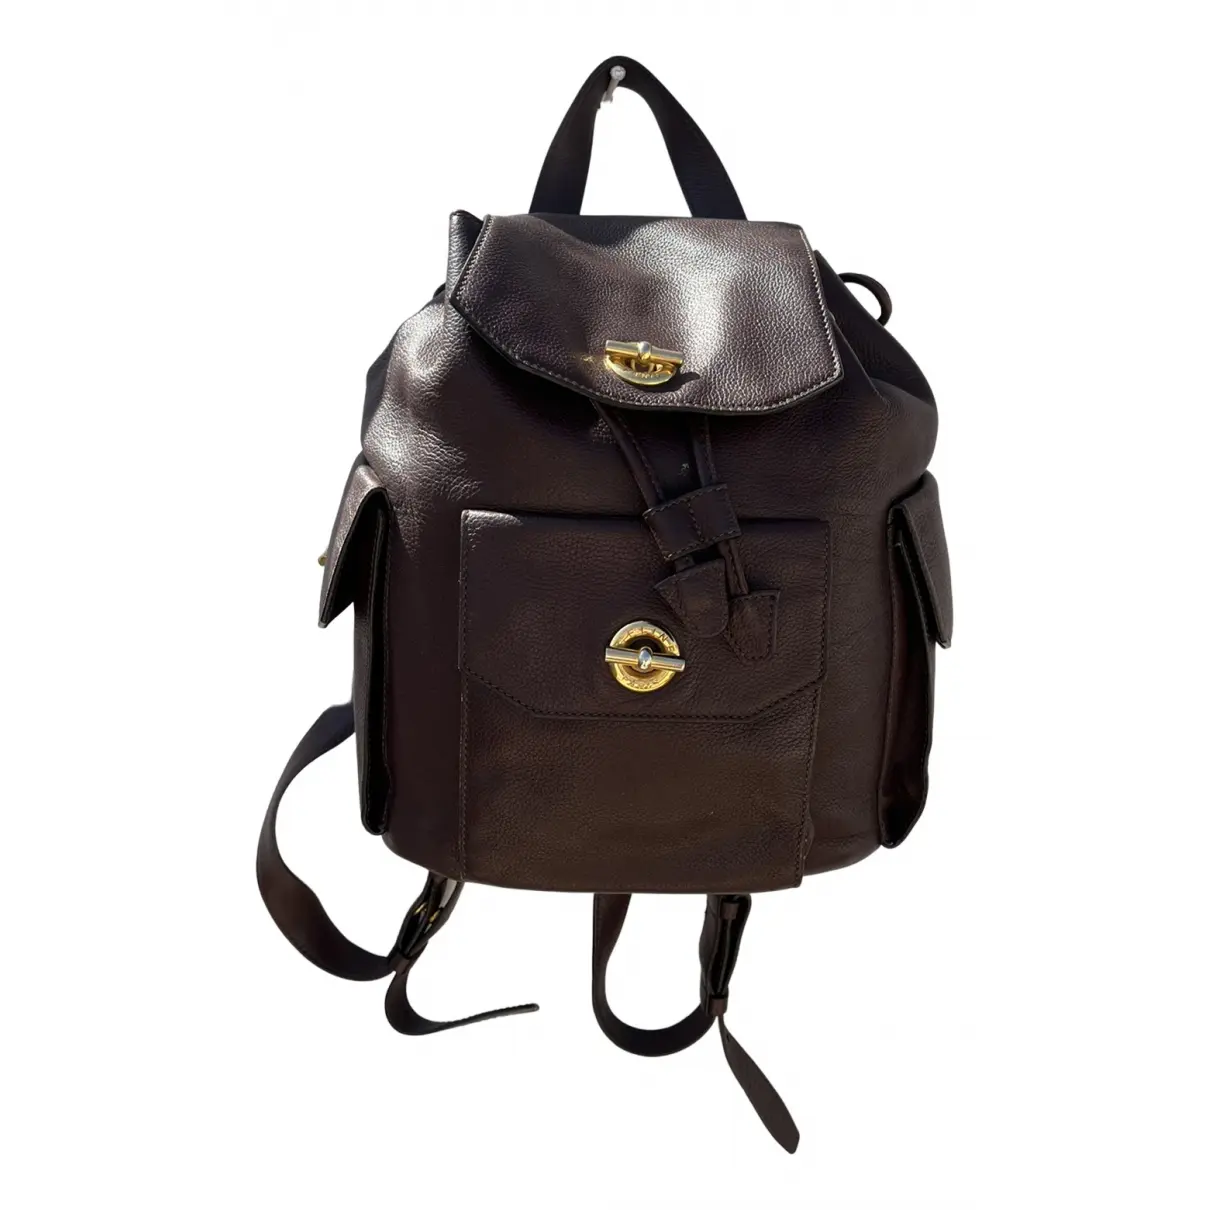 Folco leather backpack